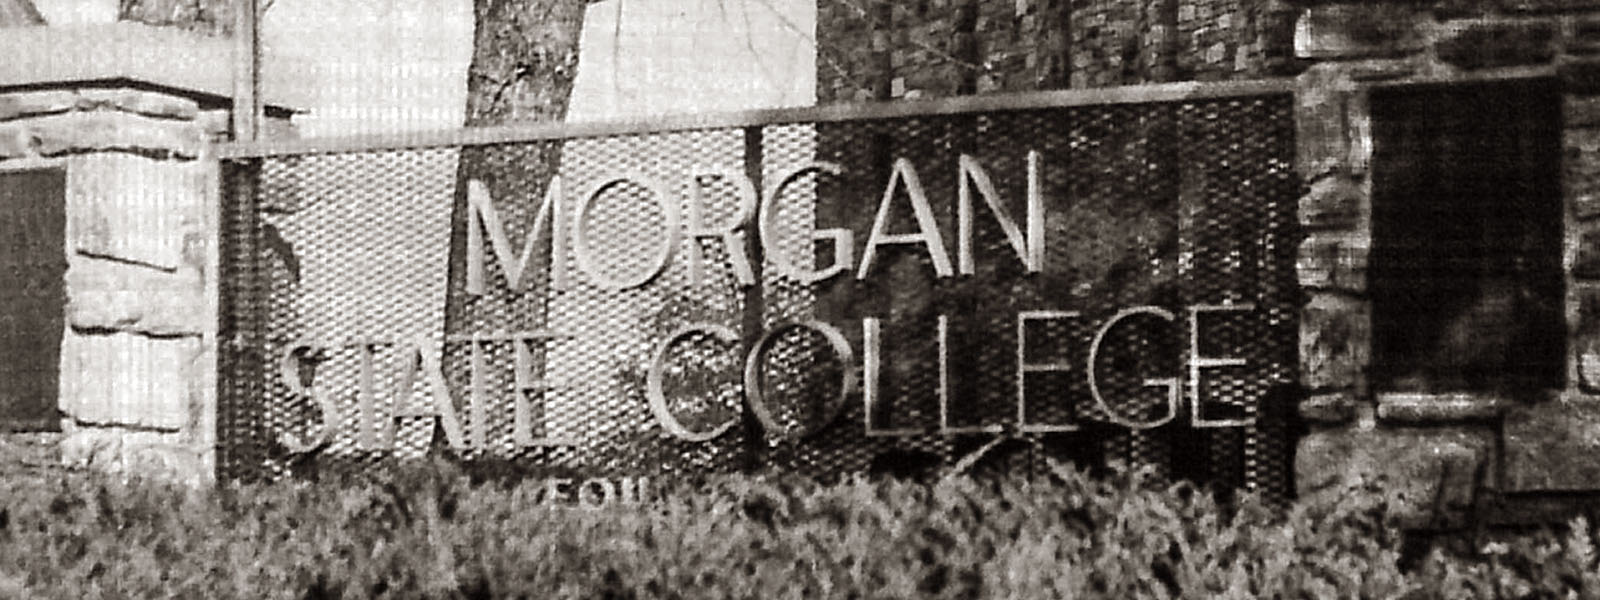 Morgan State College sign